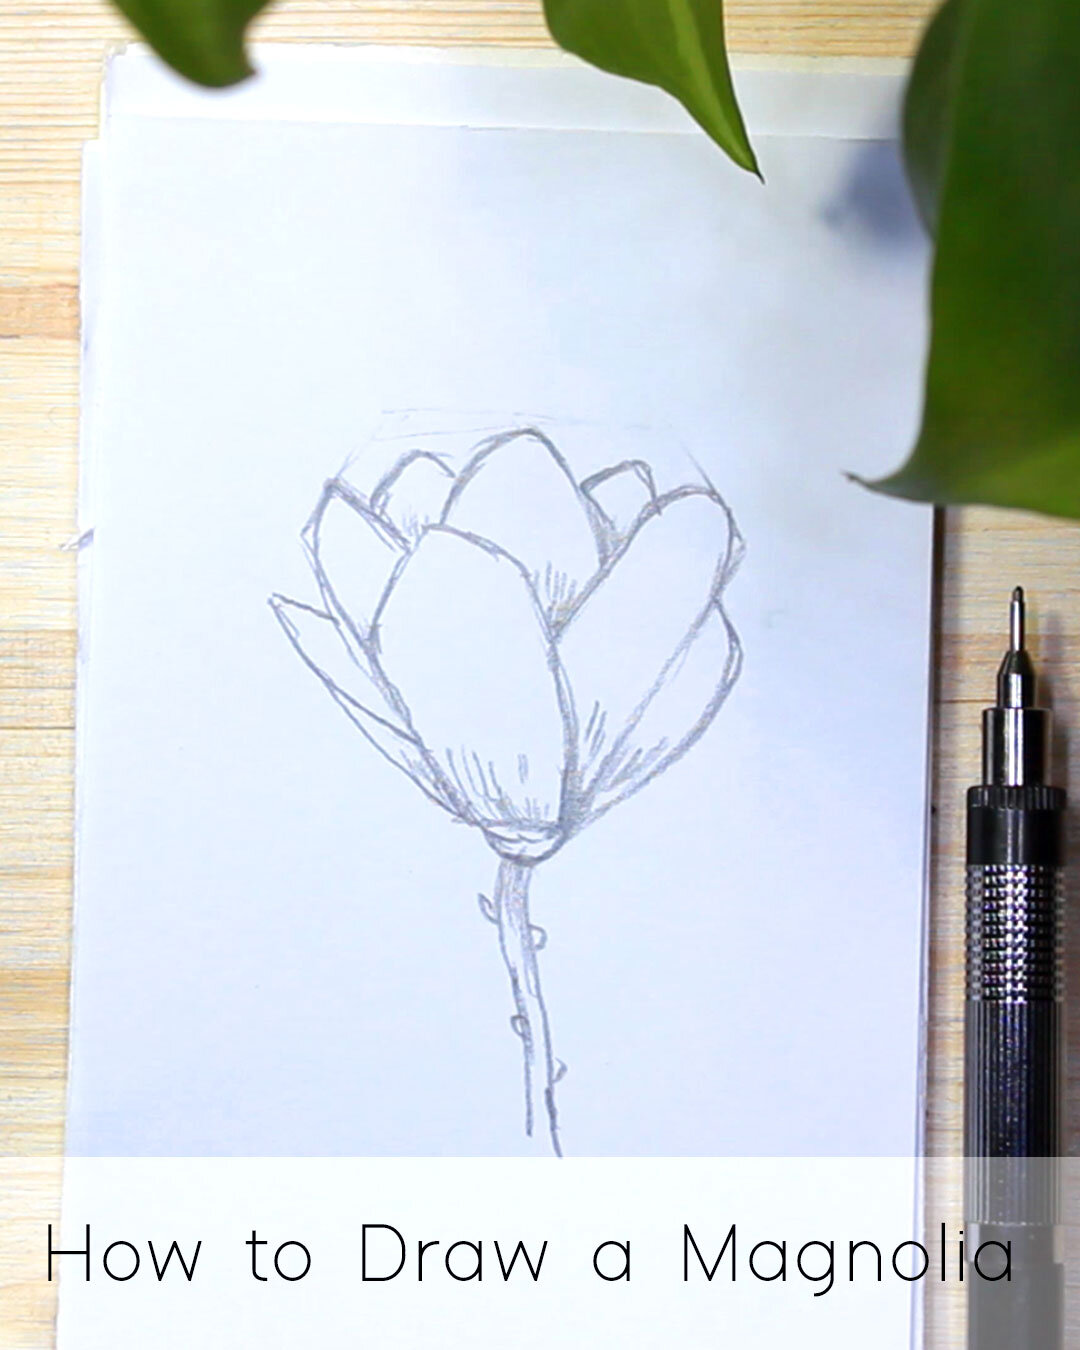 How To Draw Easy Flowers, Step by Step, Drawing Guide, by Dawn - DragoArt-saigonsouth.com.vn